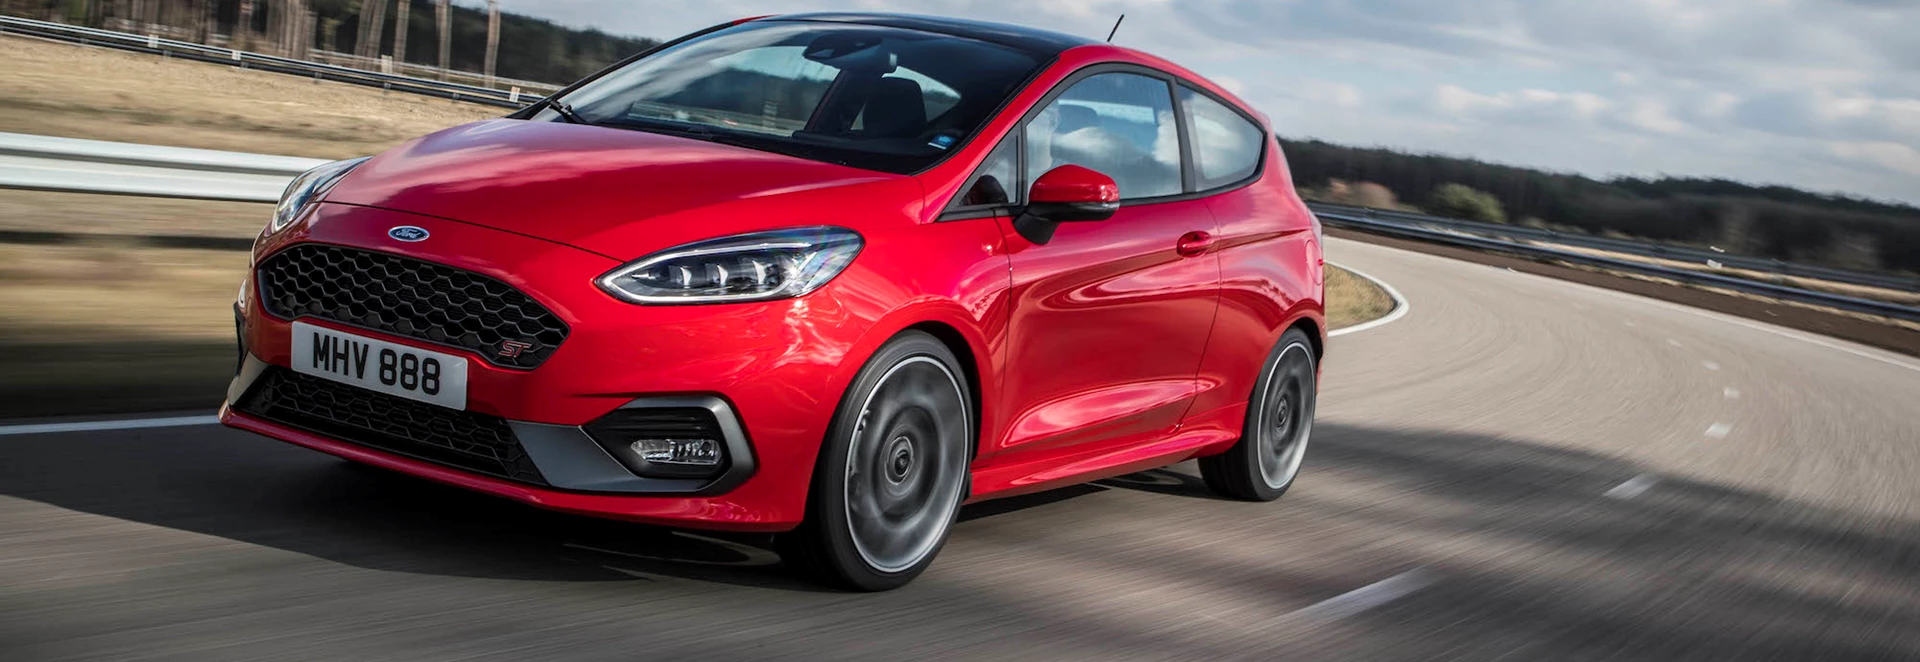 More details announced for the 2018 Ford Fiesta ST 